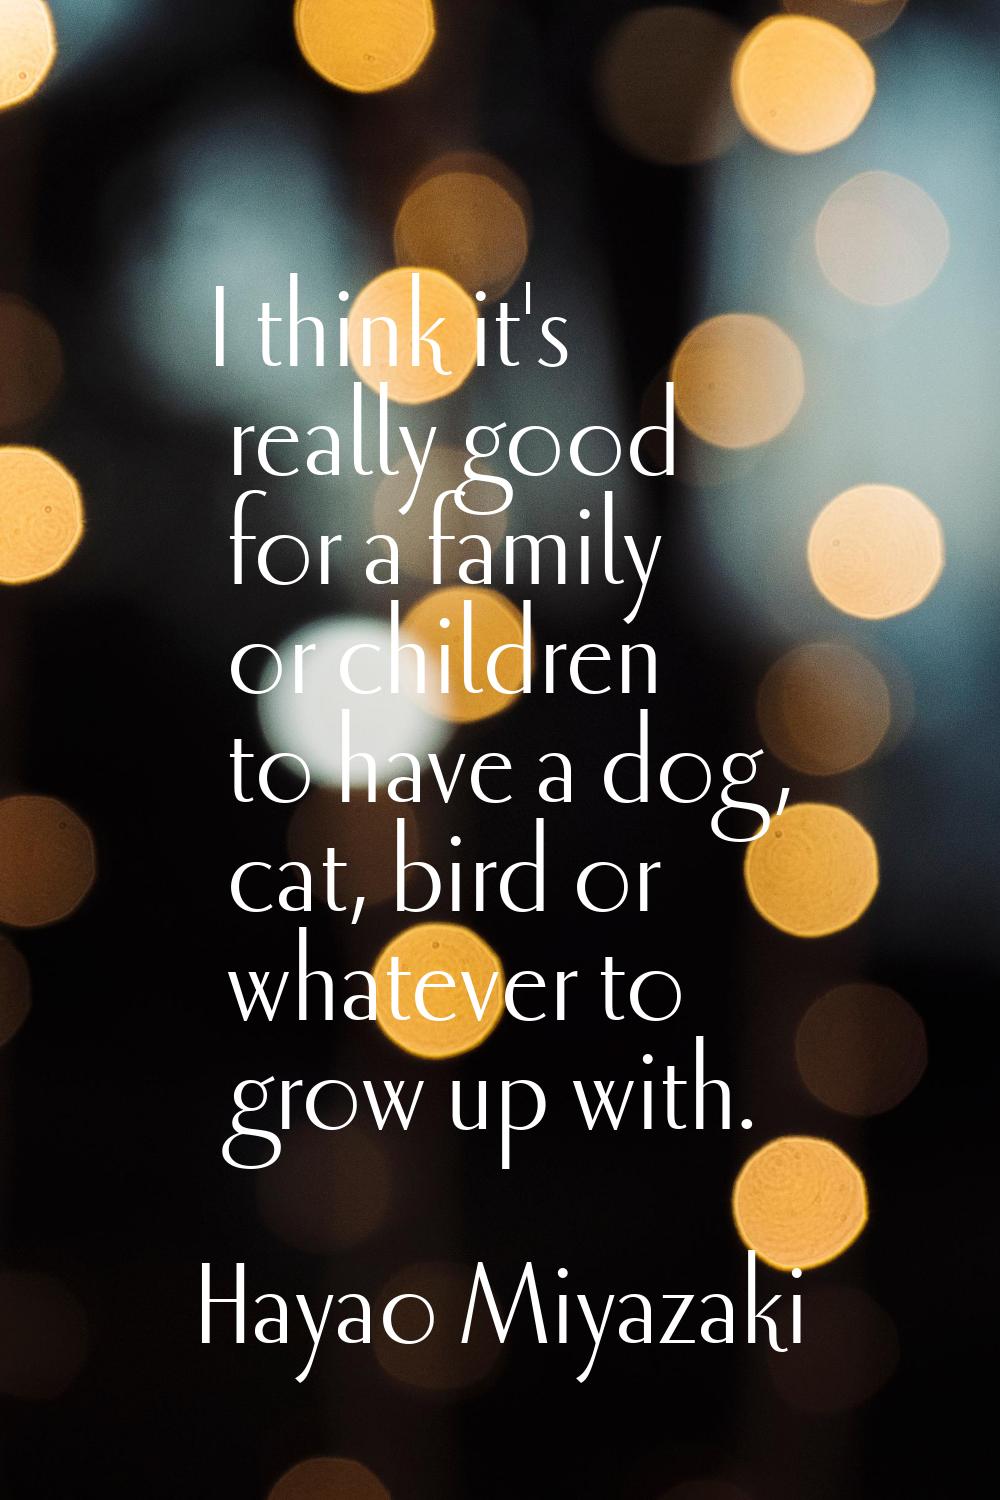 I think it's really good for a family or children to have a dog, cat, bird or whatever to grow up w